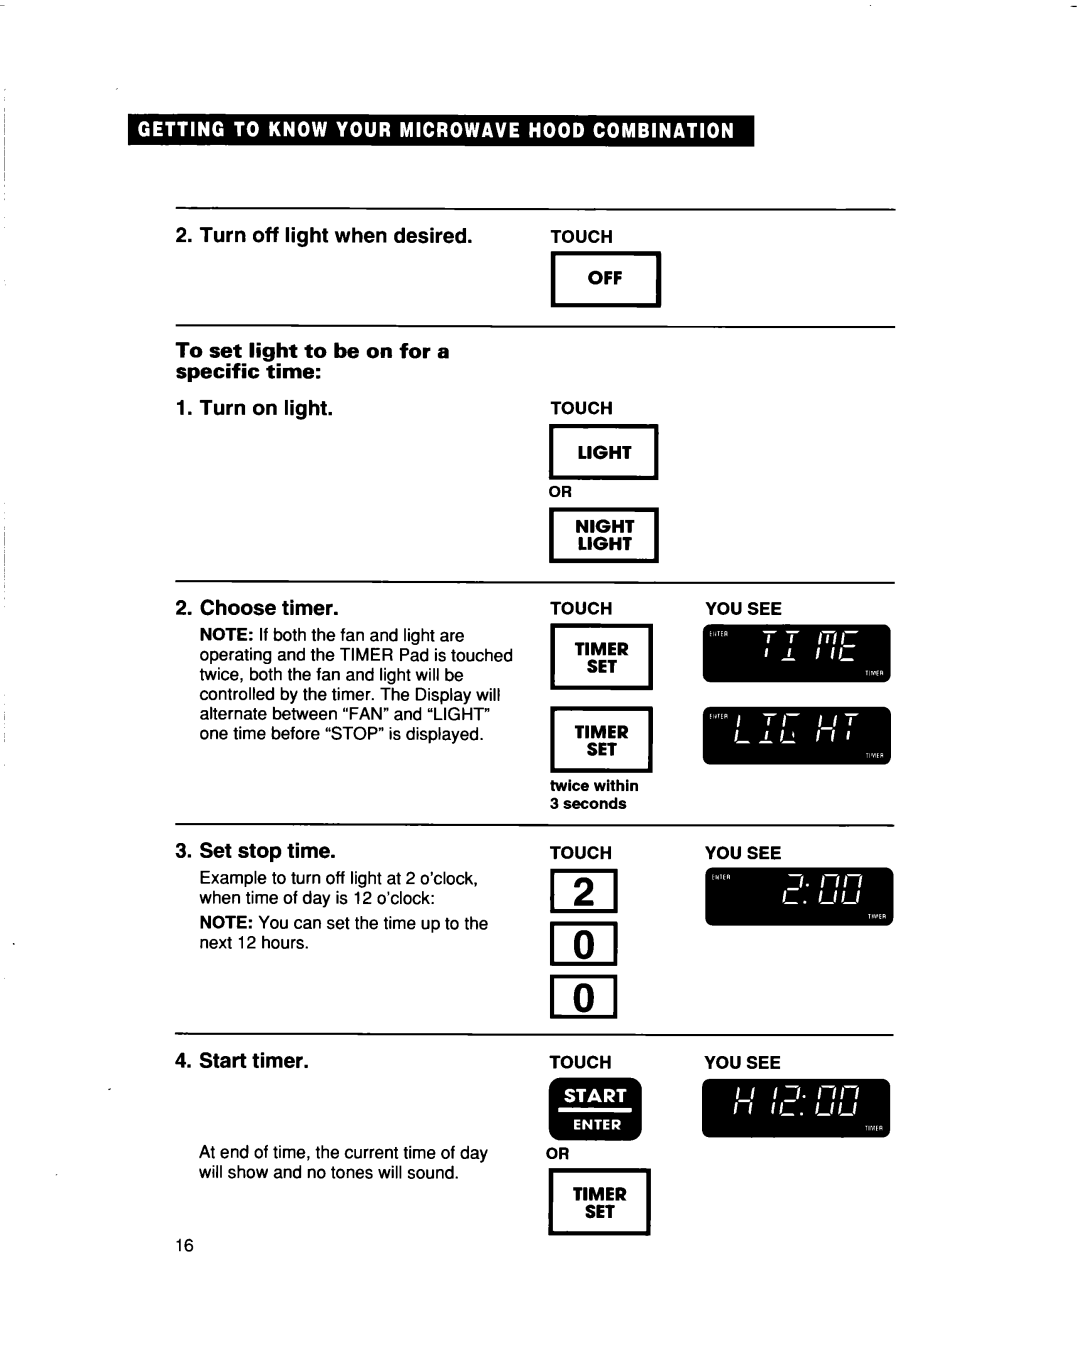 Whirlpool MH9115XB Turn off light when desired, To set light to be on for a specific time, Turn on light 2. Choose timer 